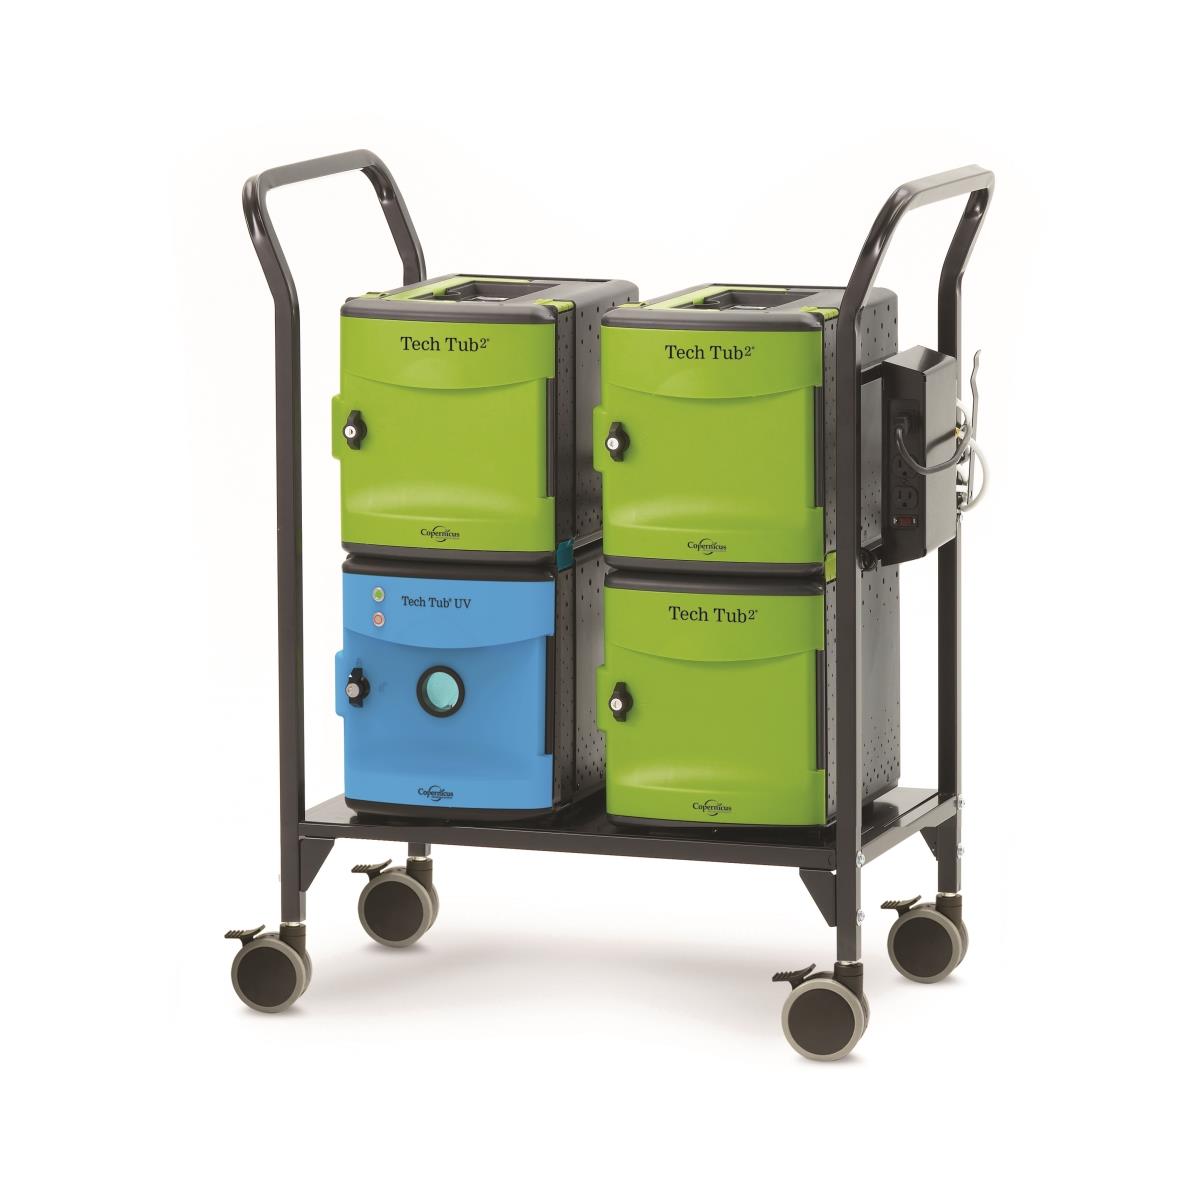 Picture of Copernicus FTT718-UV Tech Tub2 Modular Cart with UV Tub - Charges 18 Devices